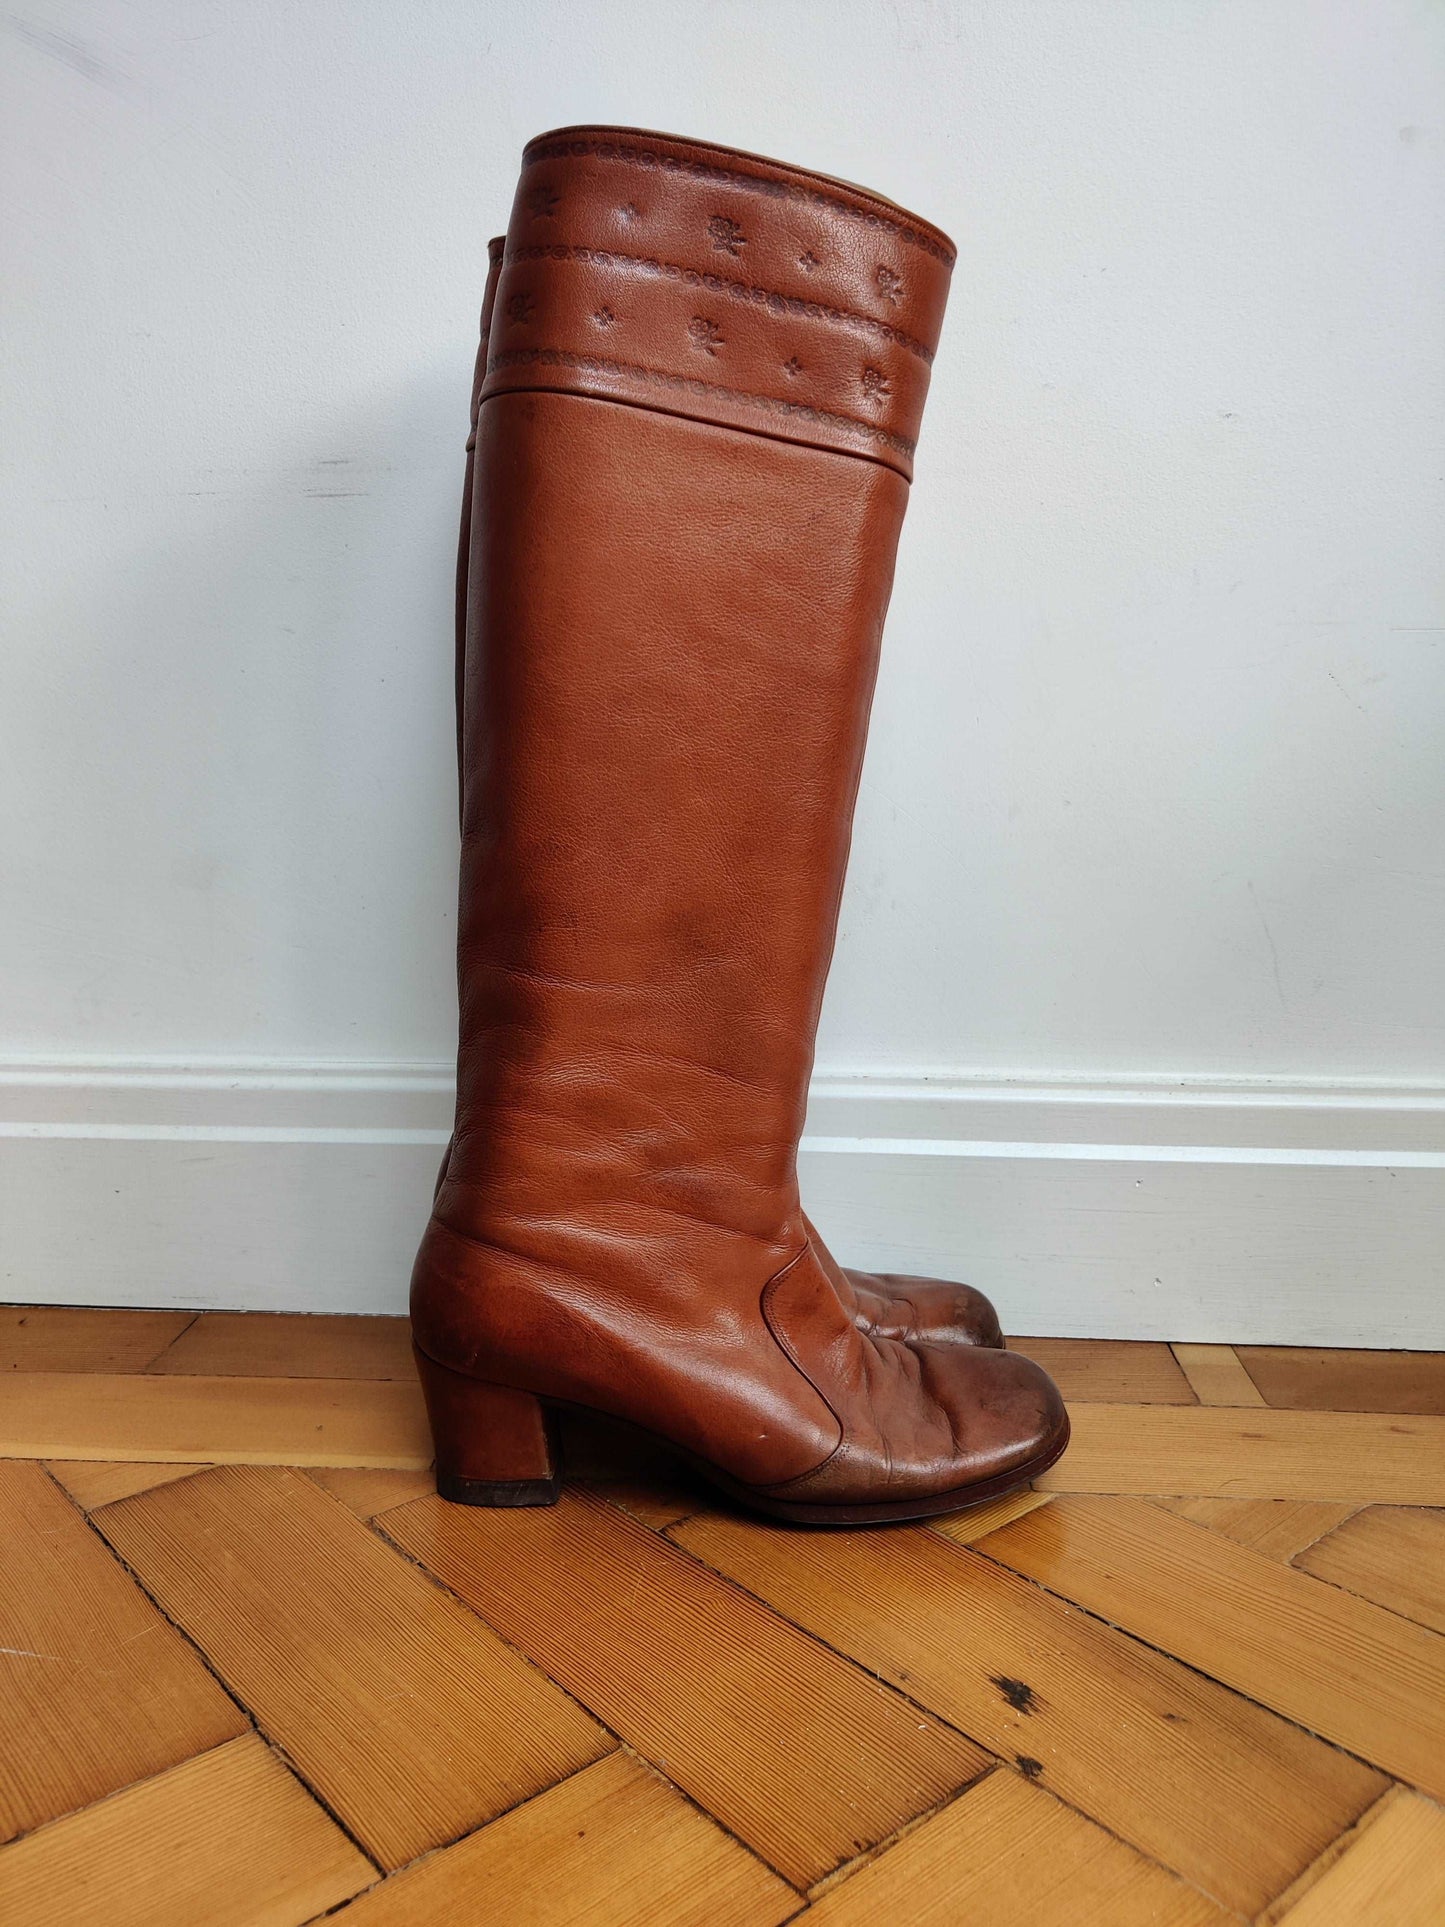 70s knee high leather boots